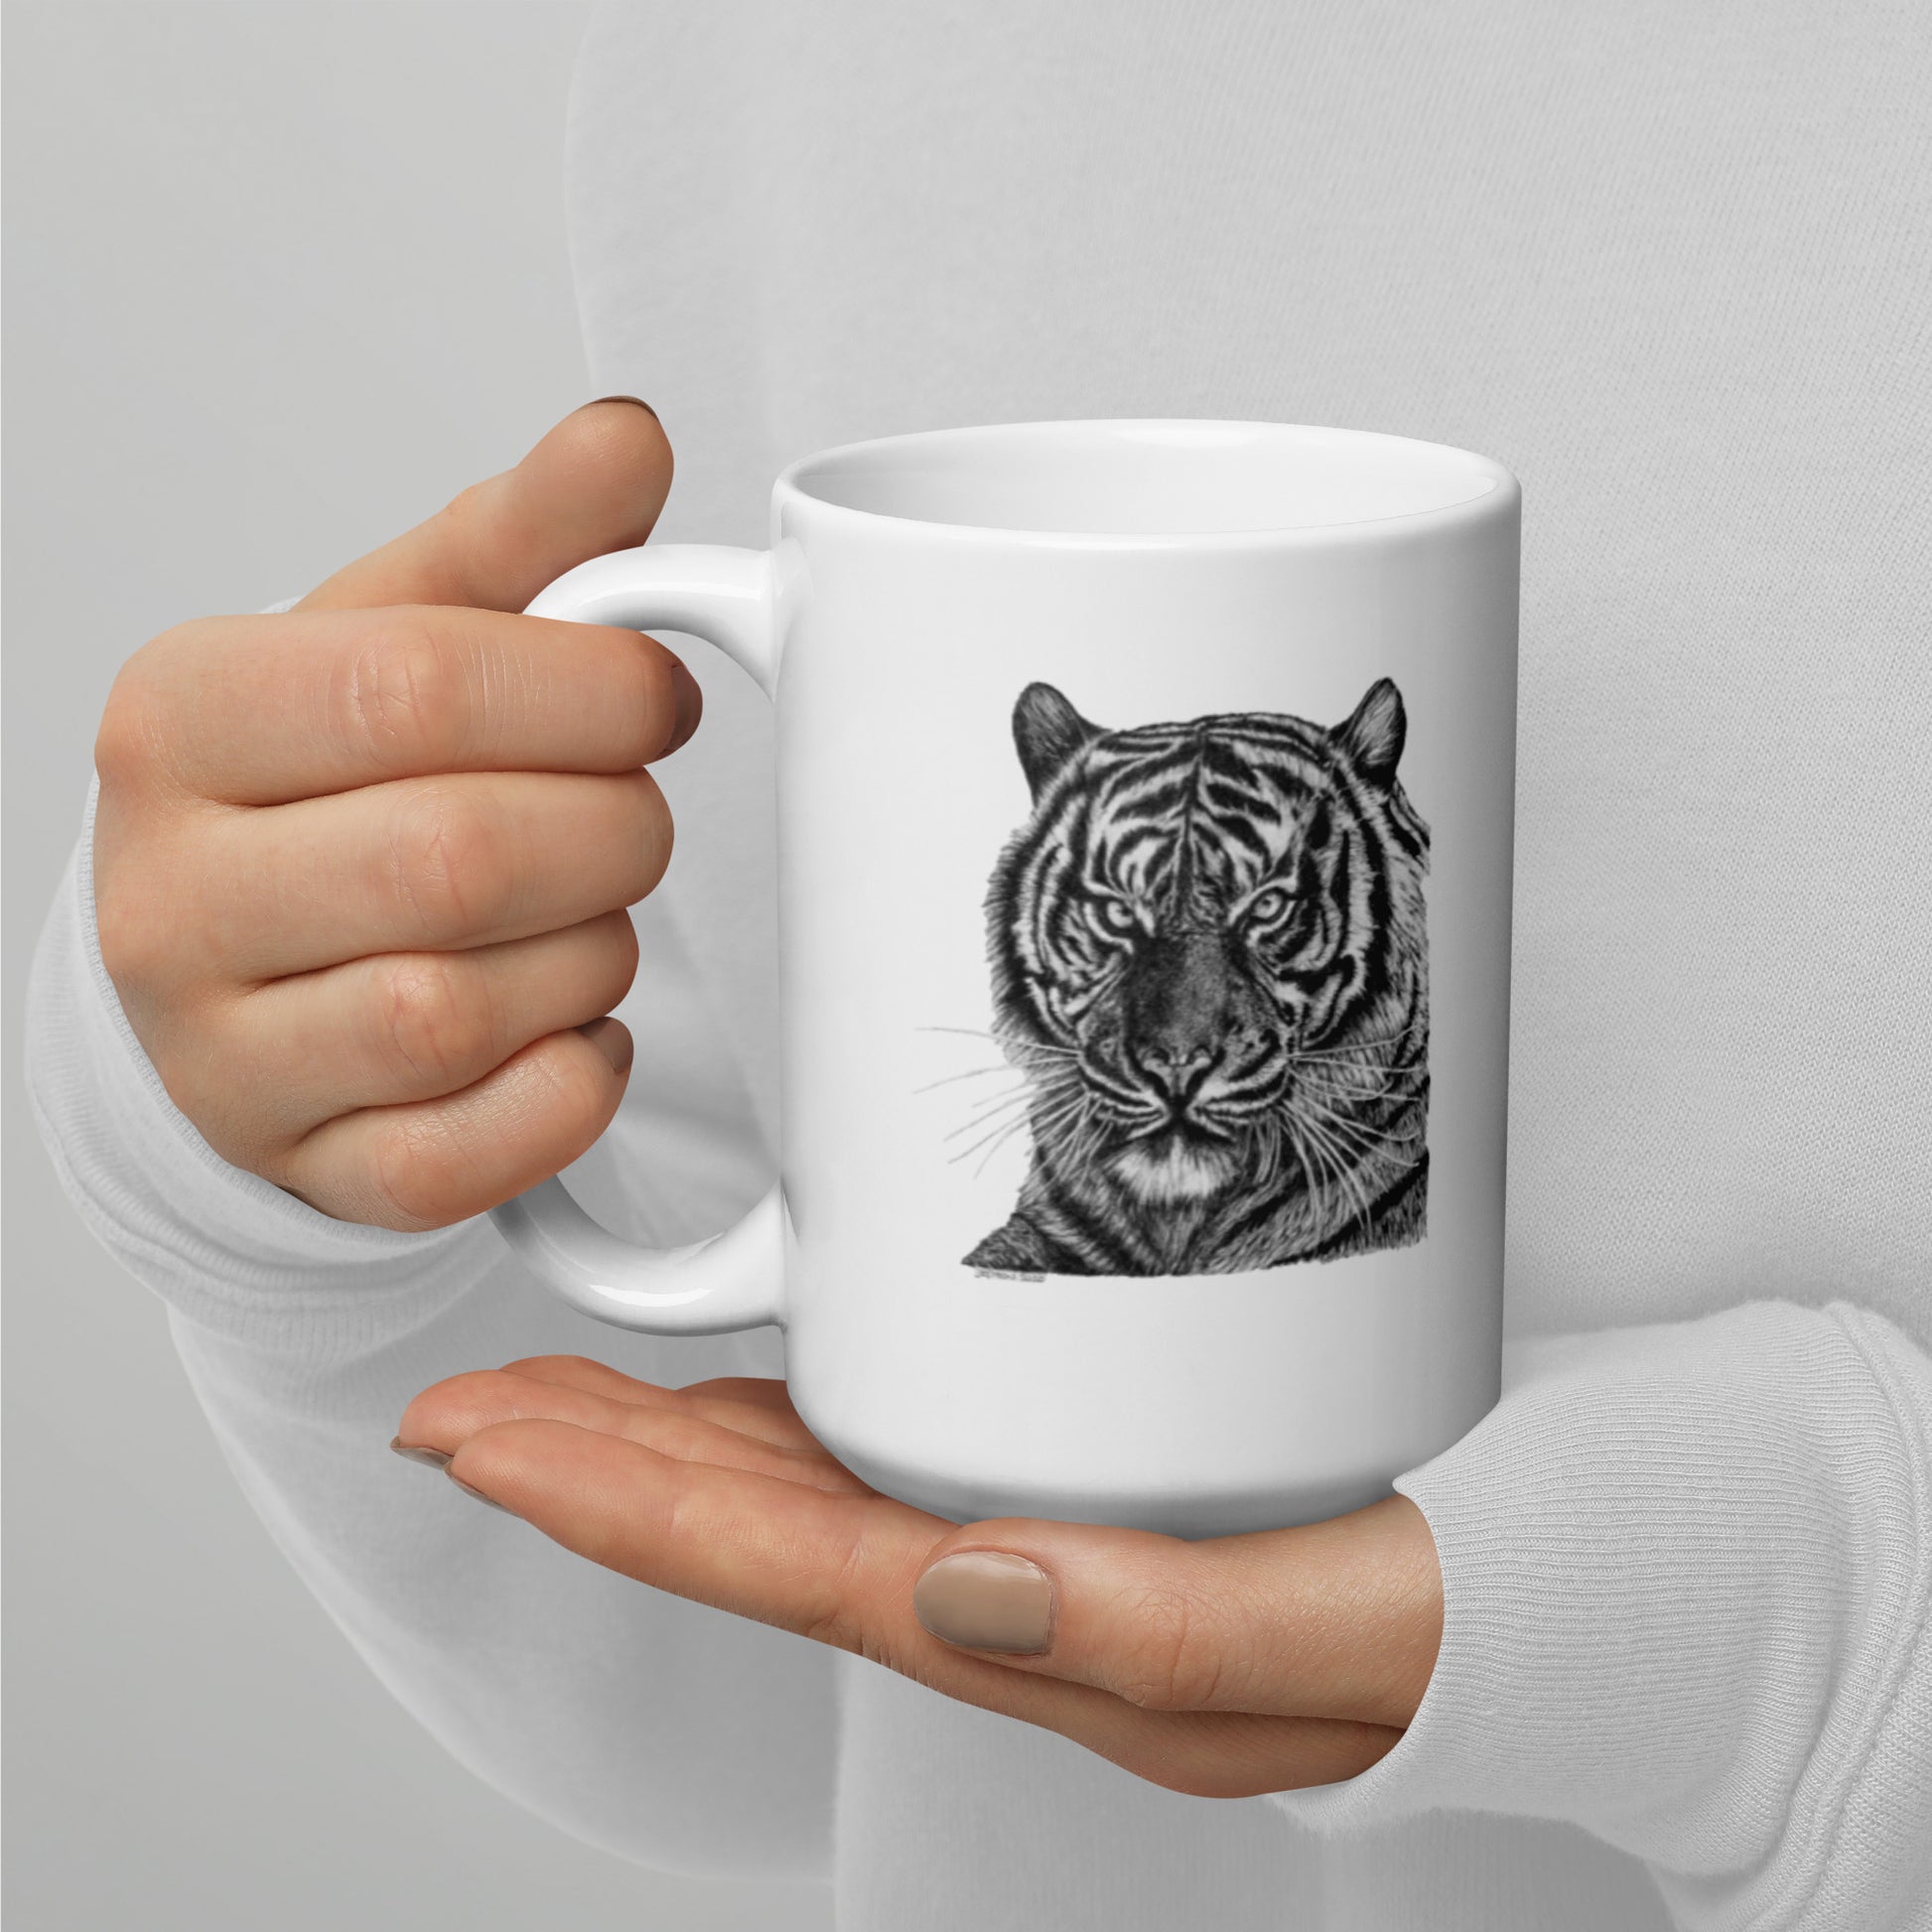 This "Tiger White Glossy Mug" is from a drawing of mine created with a graphite pencil. It has been digitally optimized and transferred to a 15oz white glossy mug.